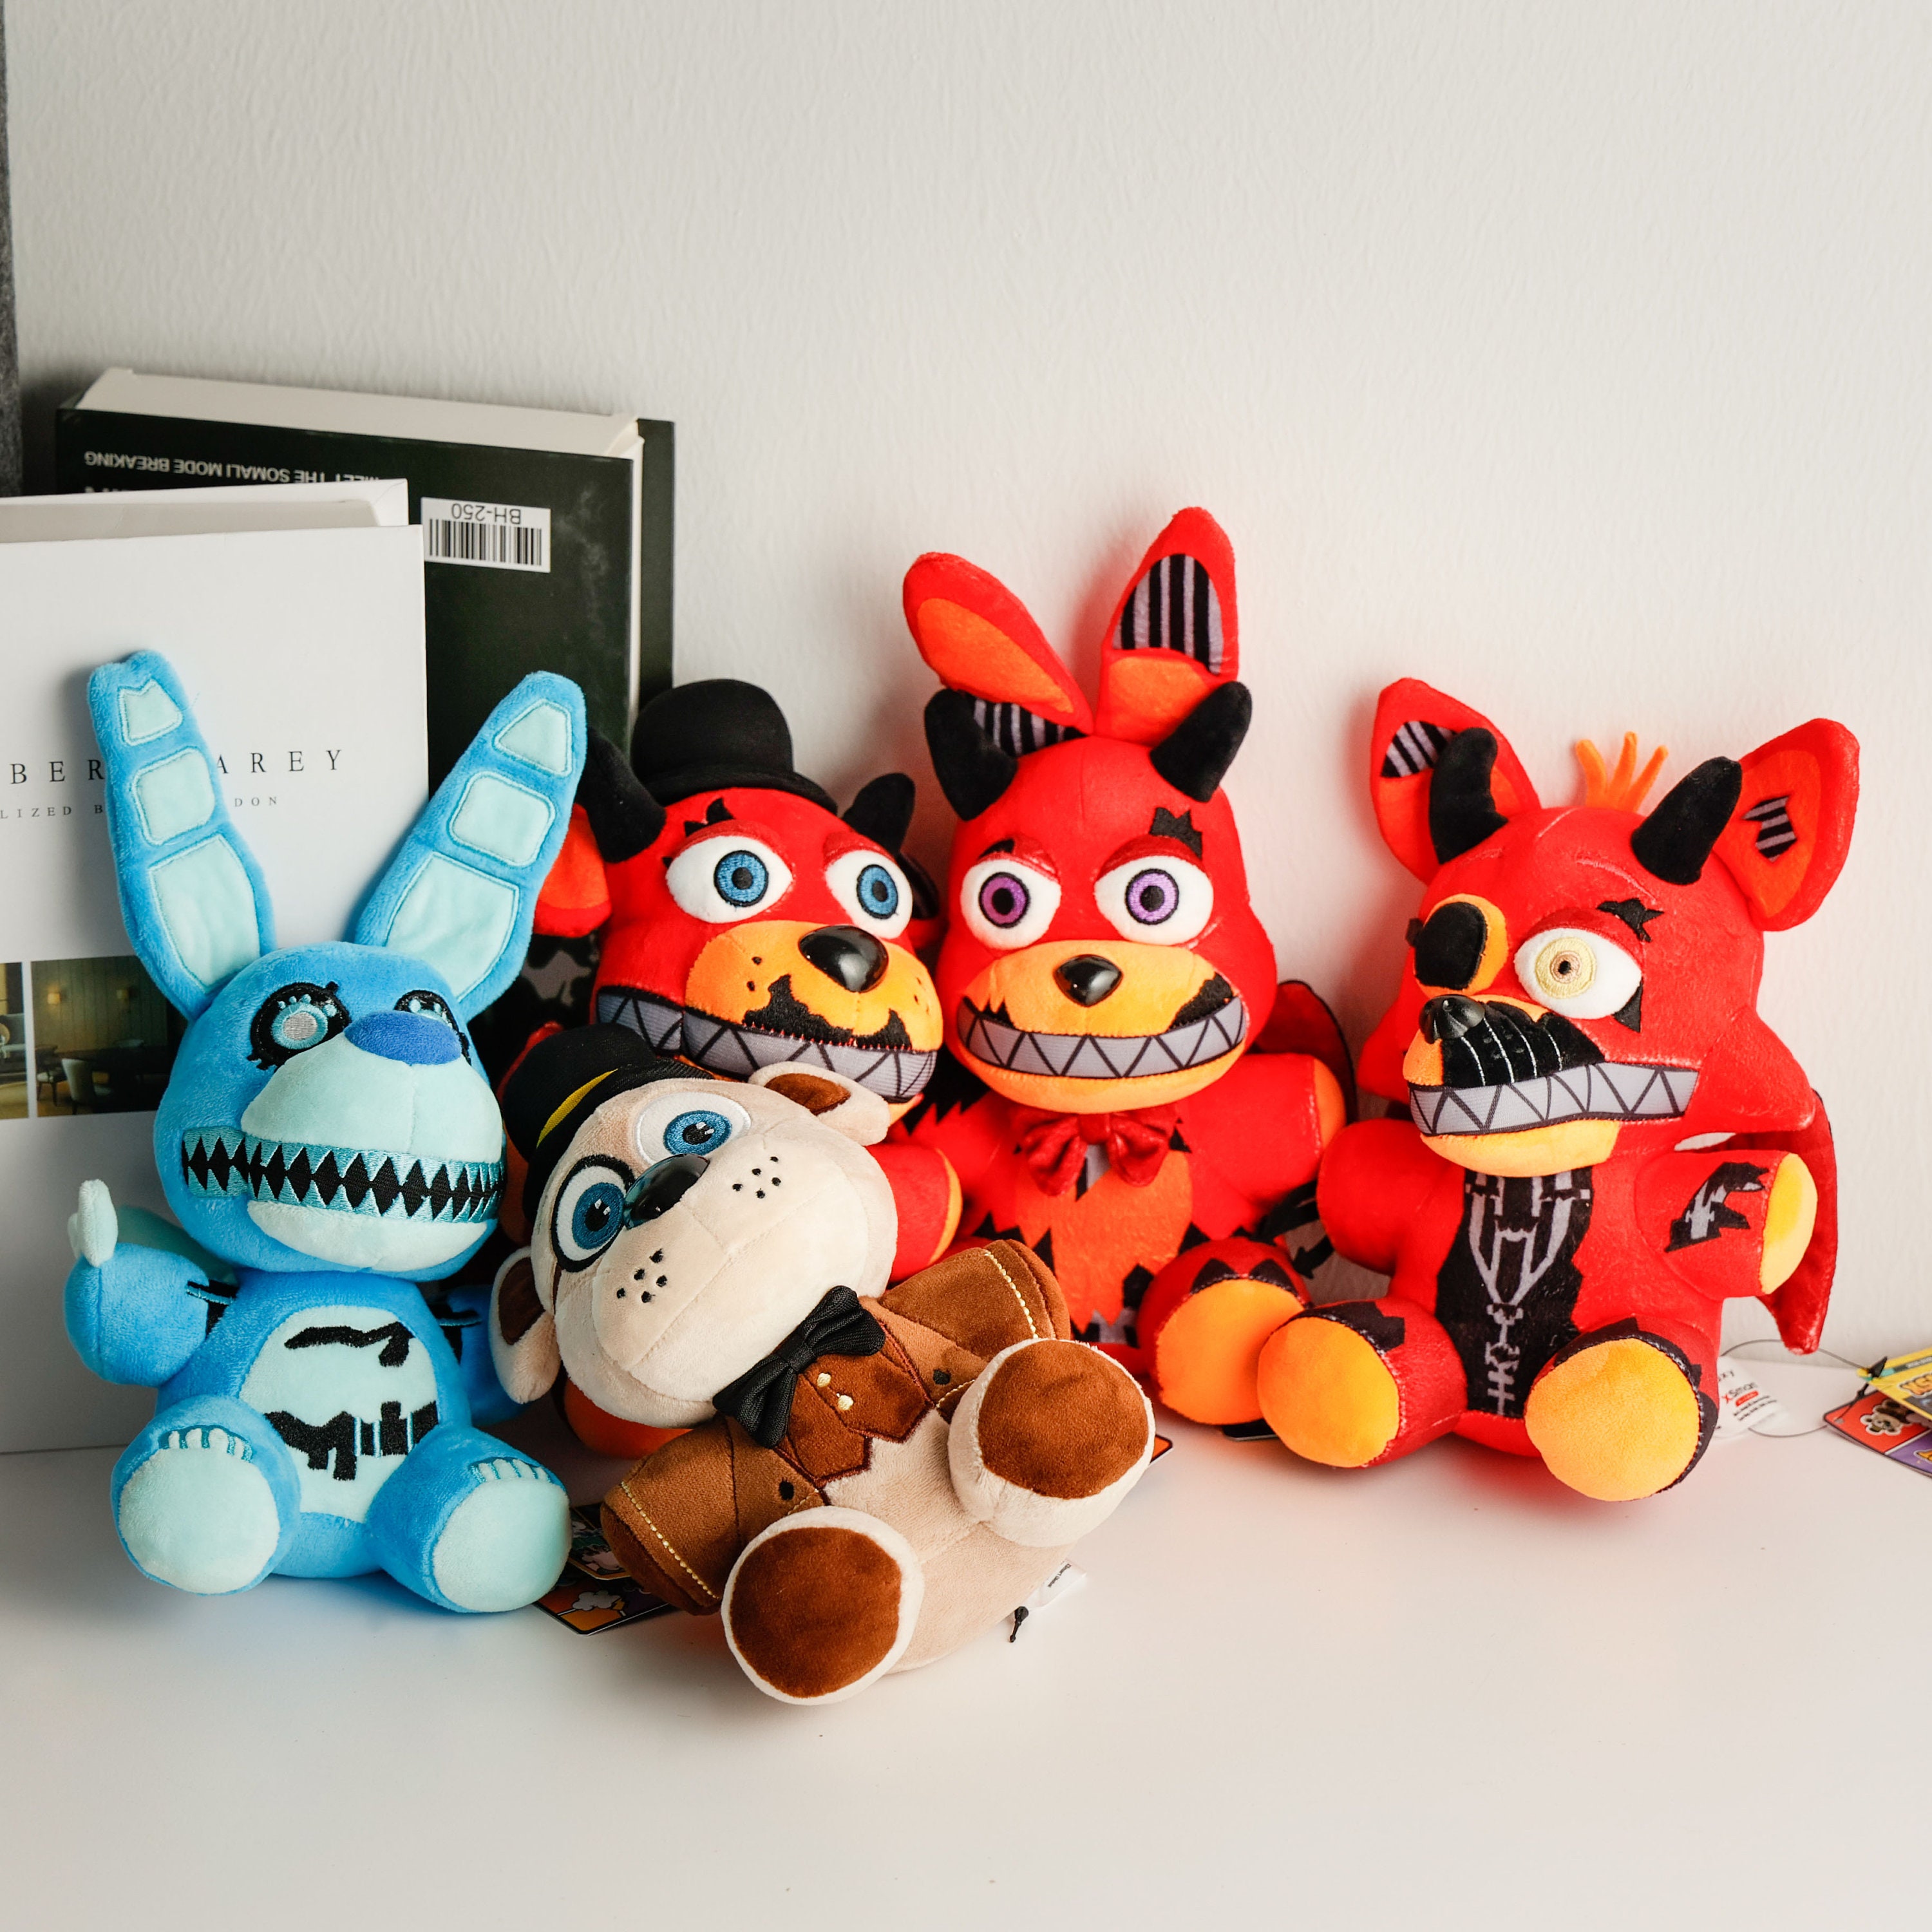 Nightmare Foxy Plush Toy, FNAF plushies Toy, FNAF All Character Stuffed  Animal Doll Children's Gift Collection,8”